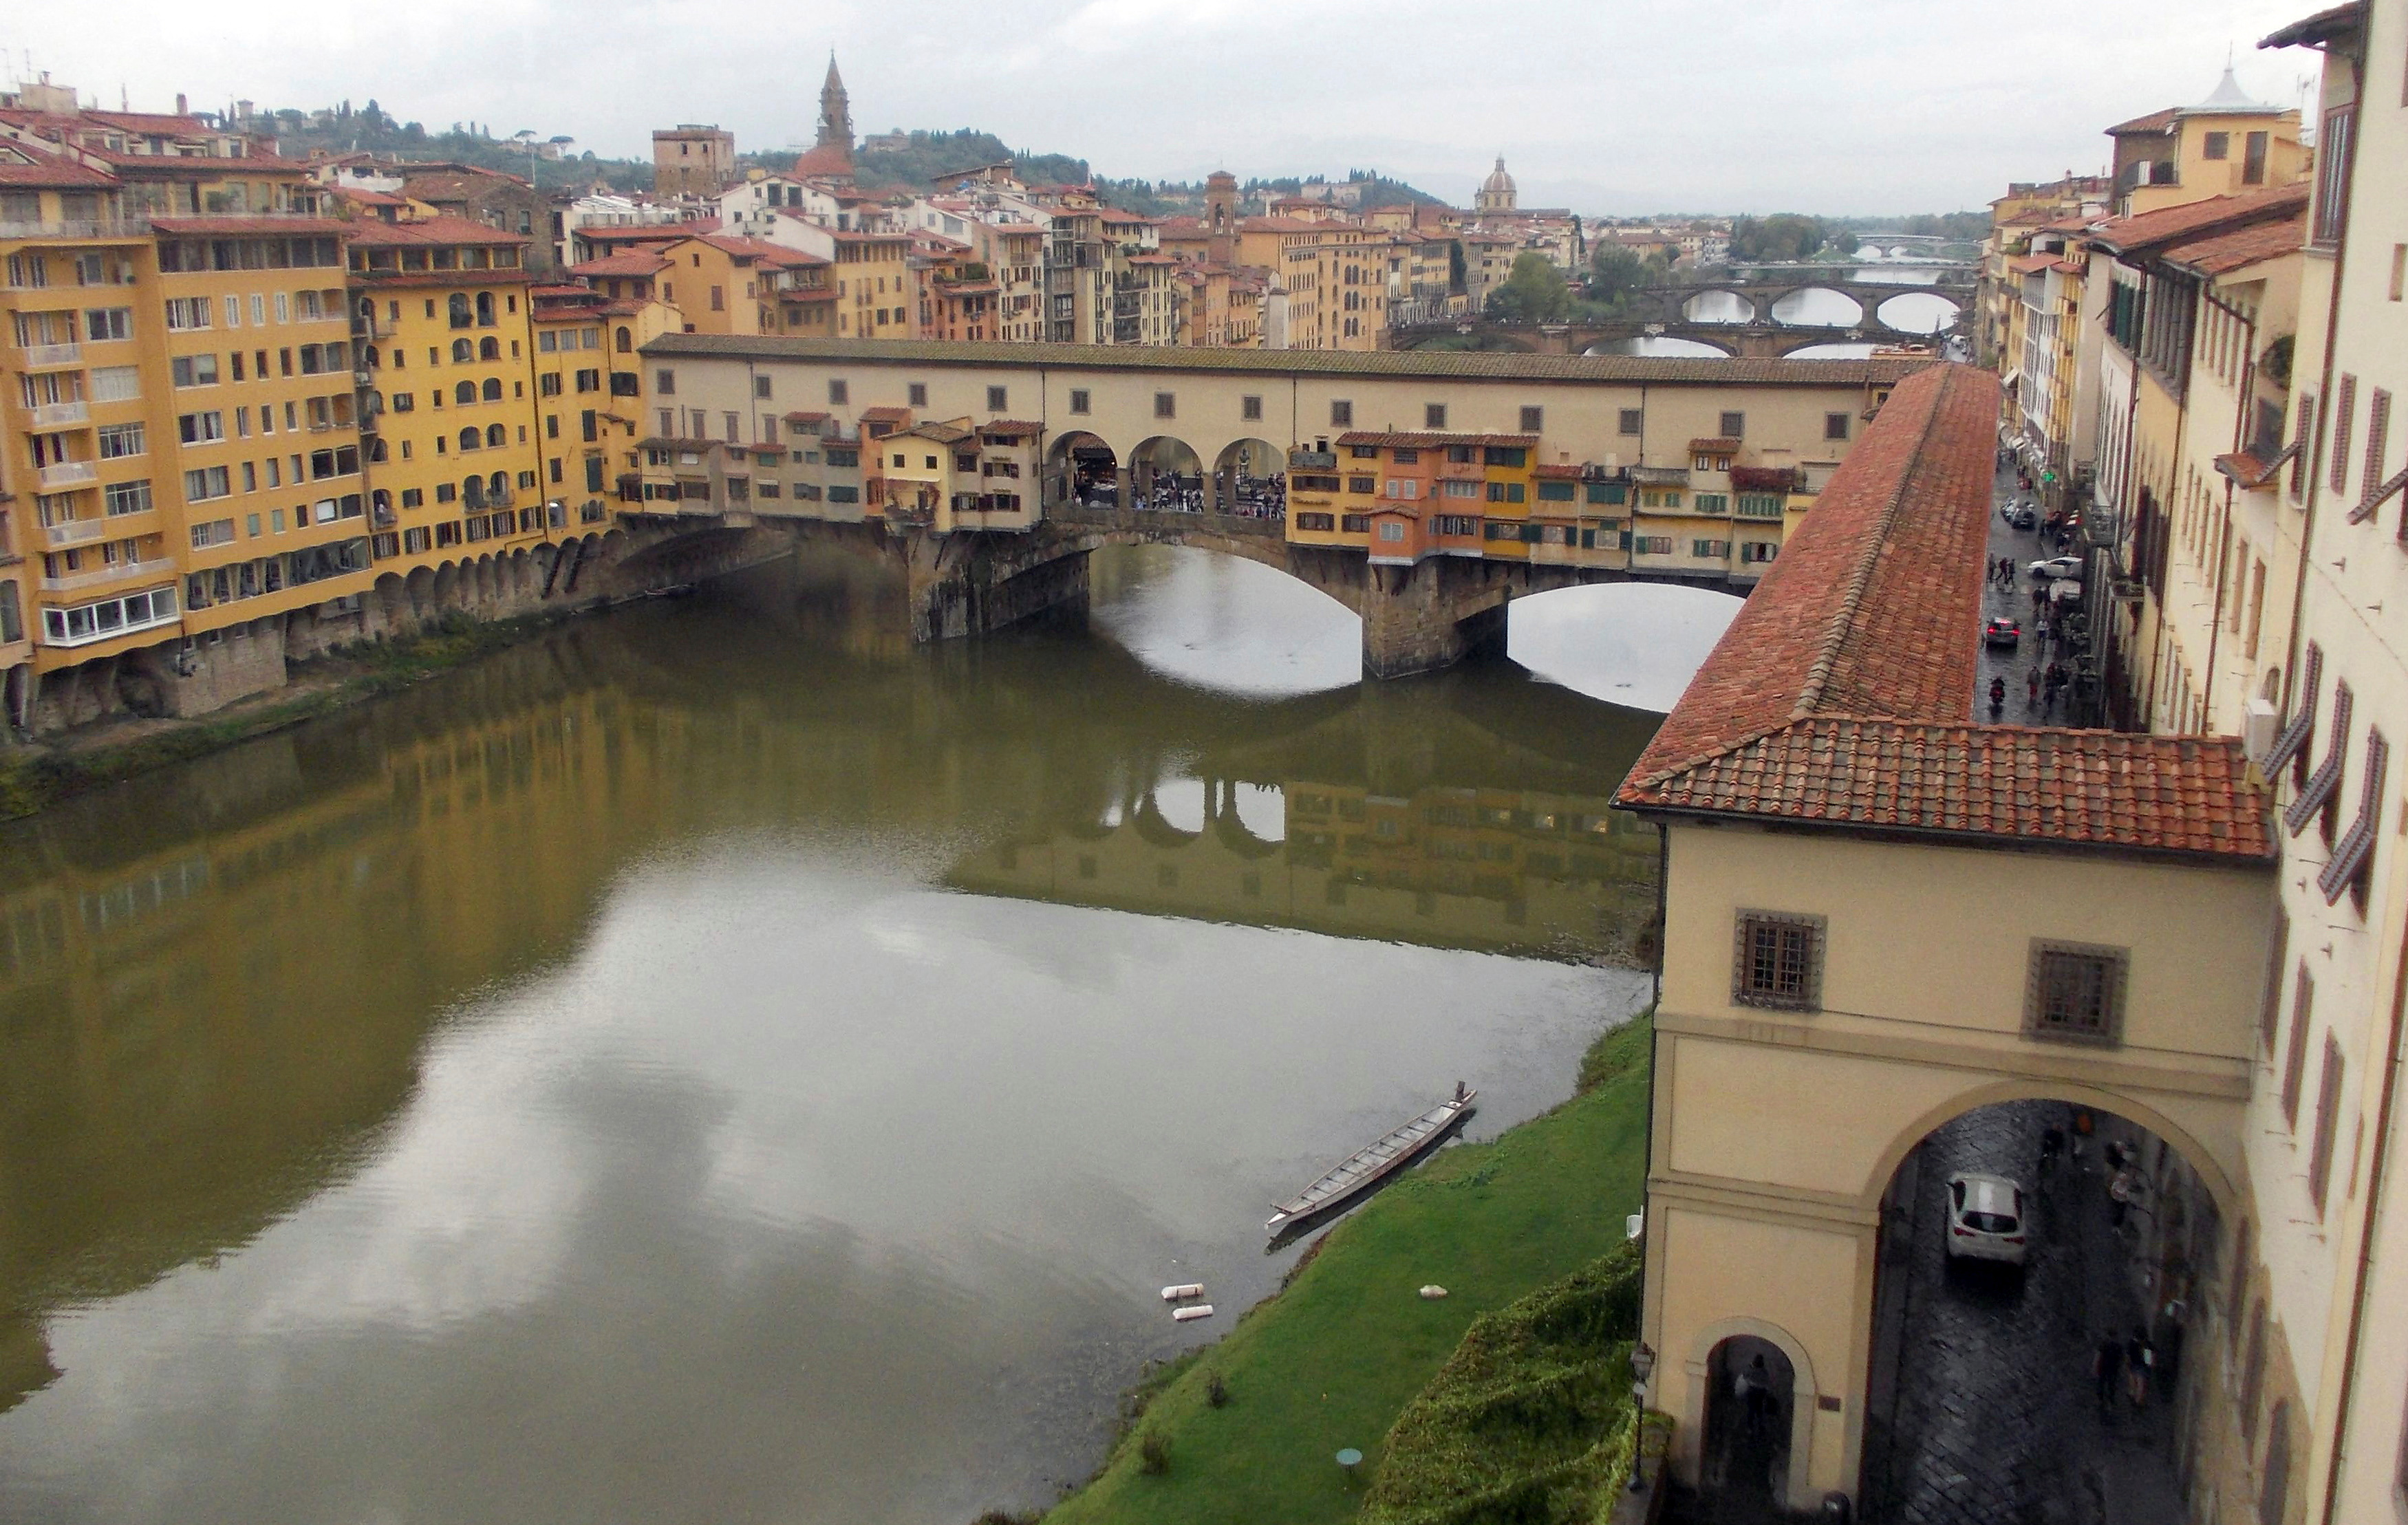 A view shows the Ponte Vecchio bridge and the Arno River in Florence